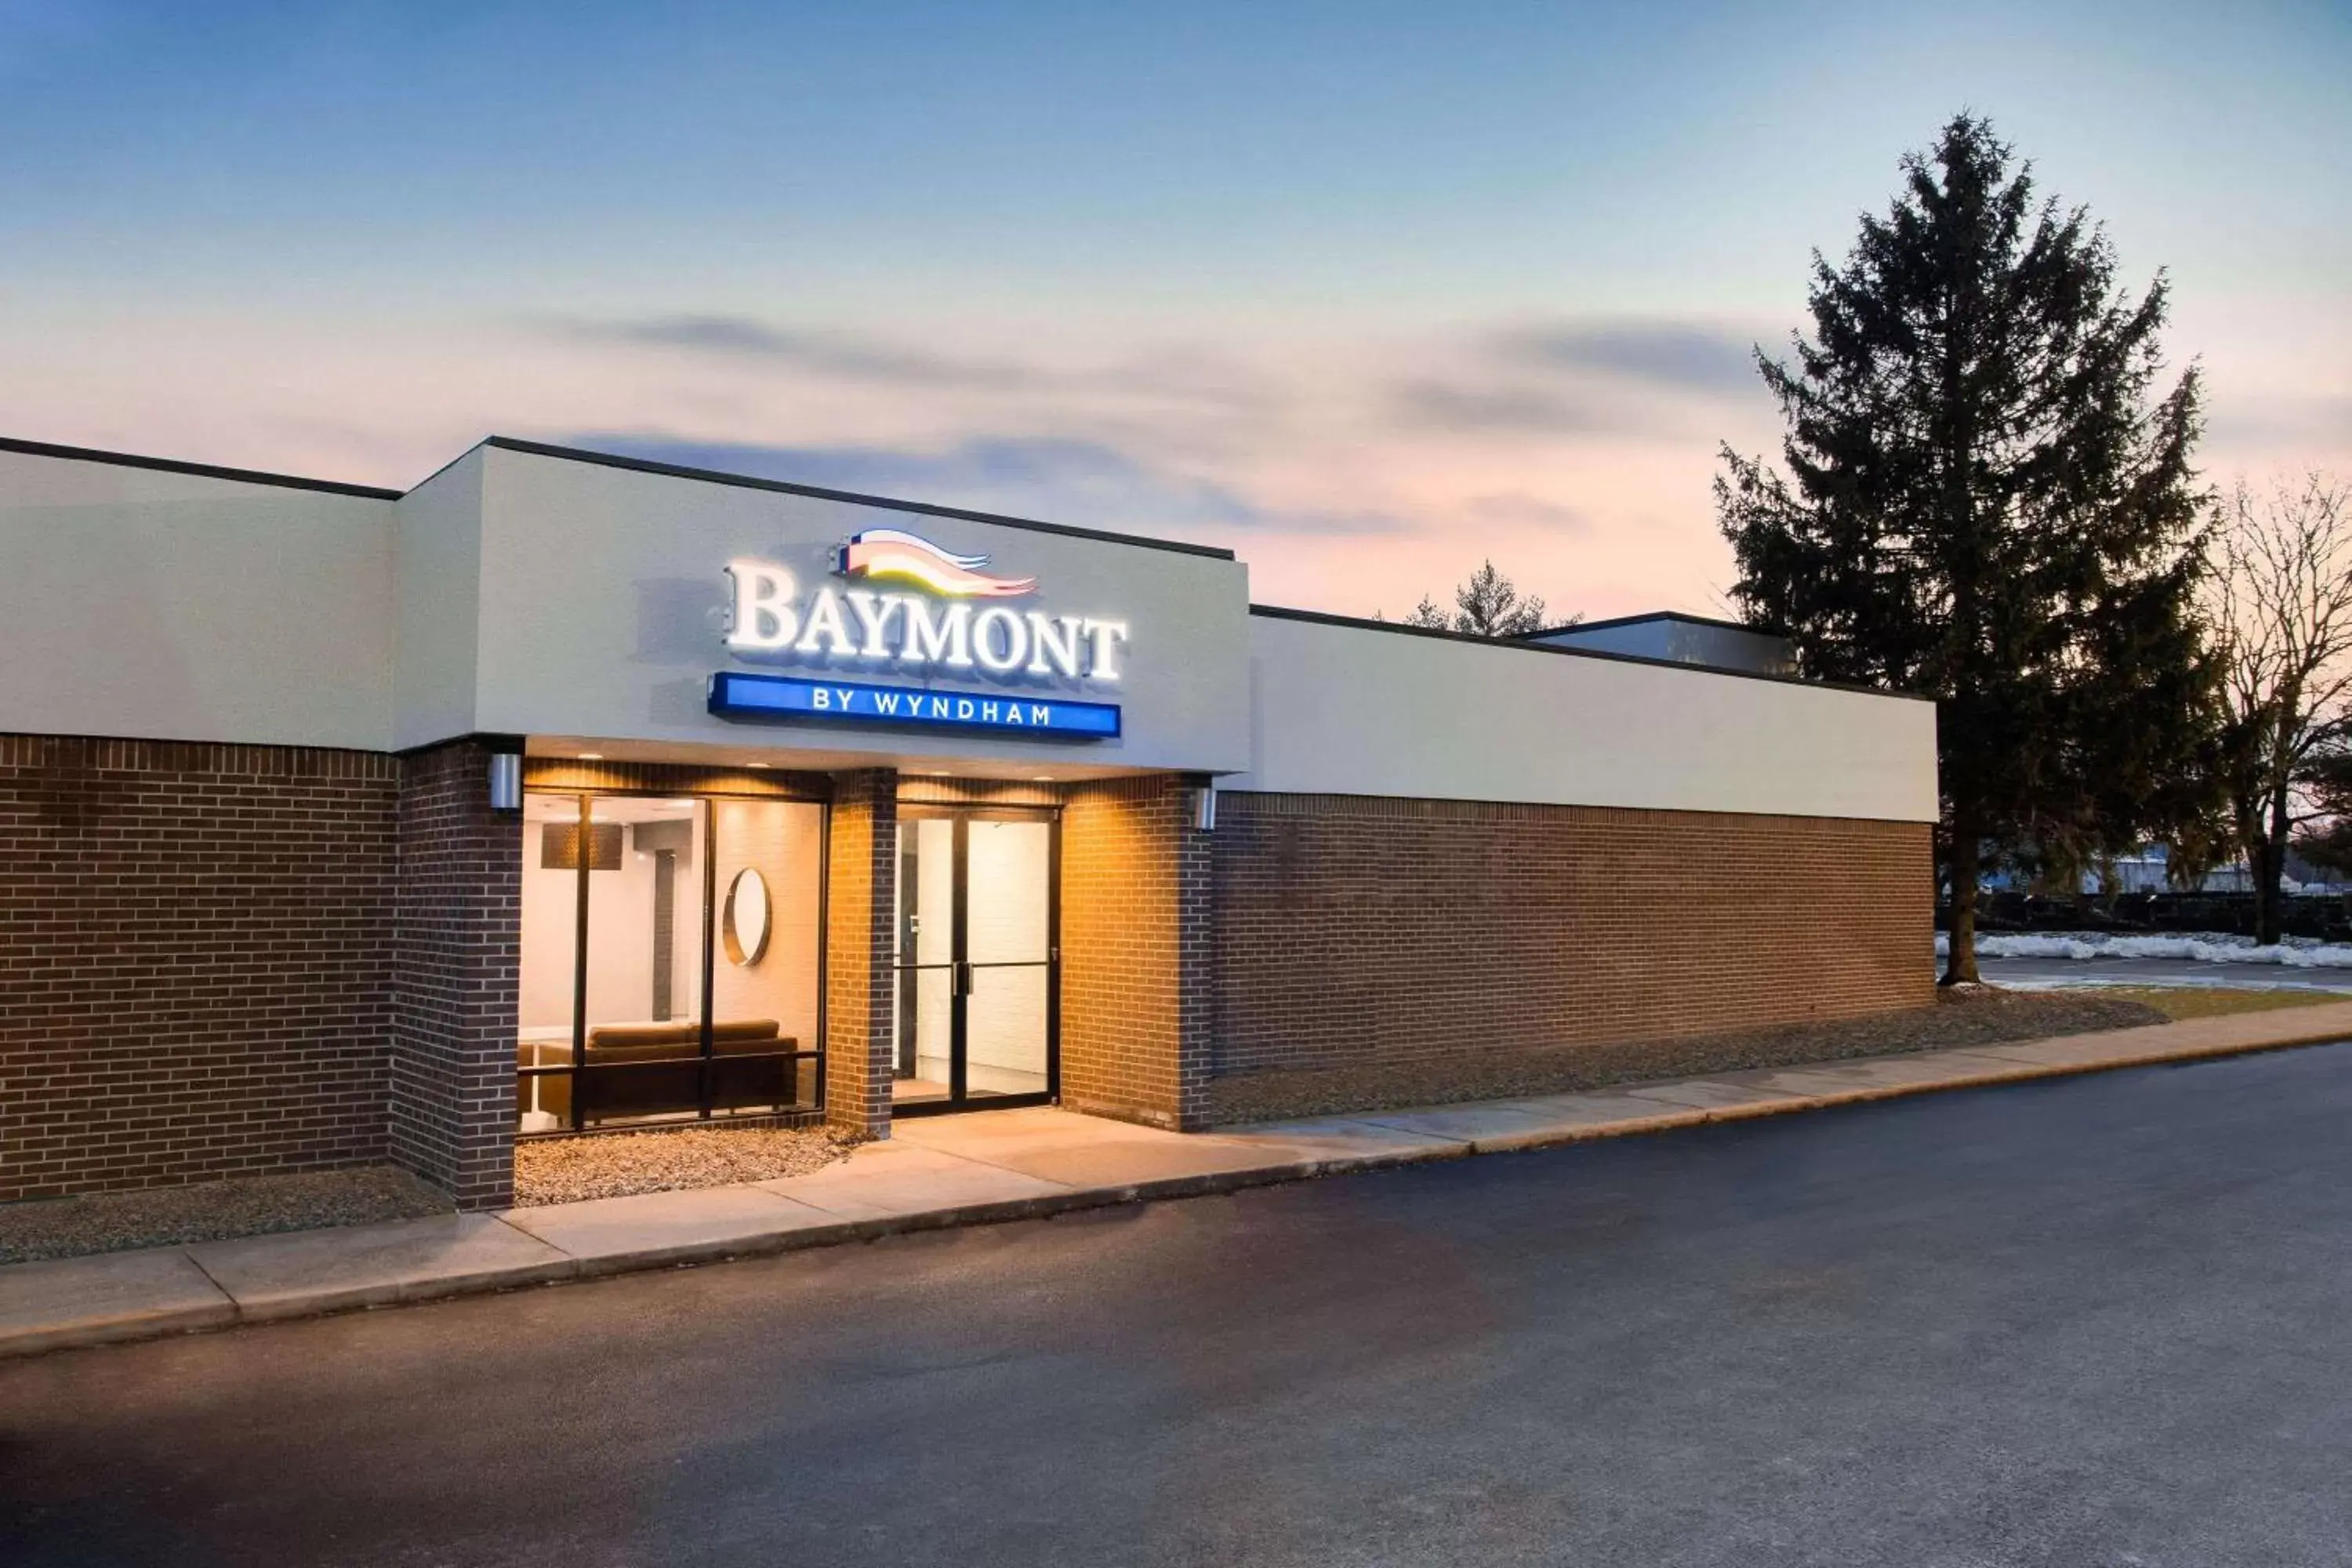 Property building in Baymont by Wyndham Greenville OH